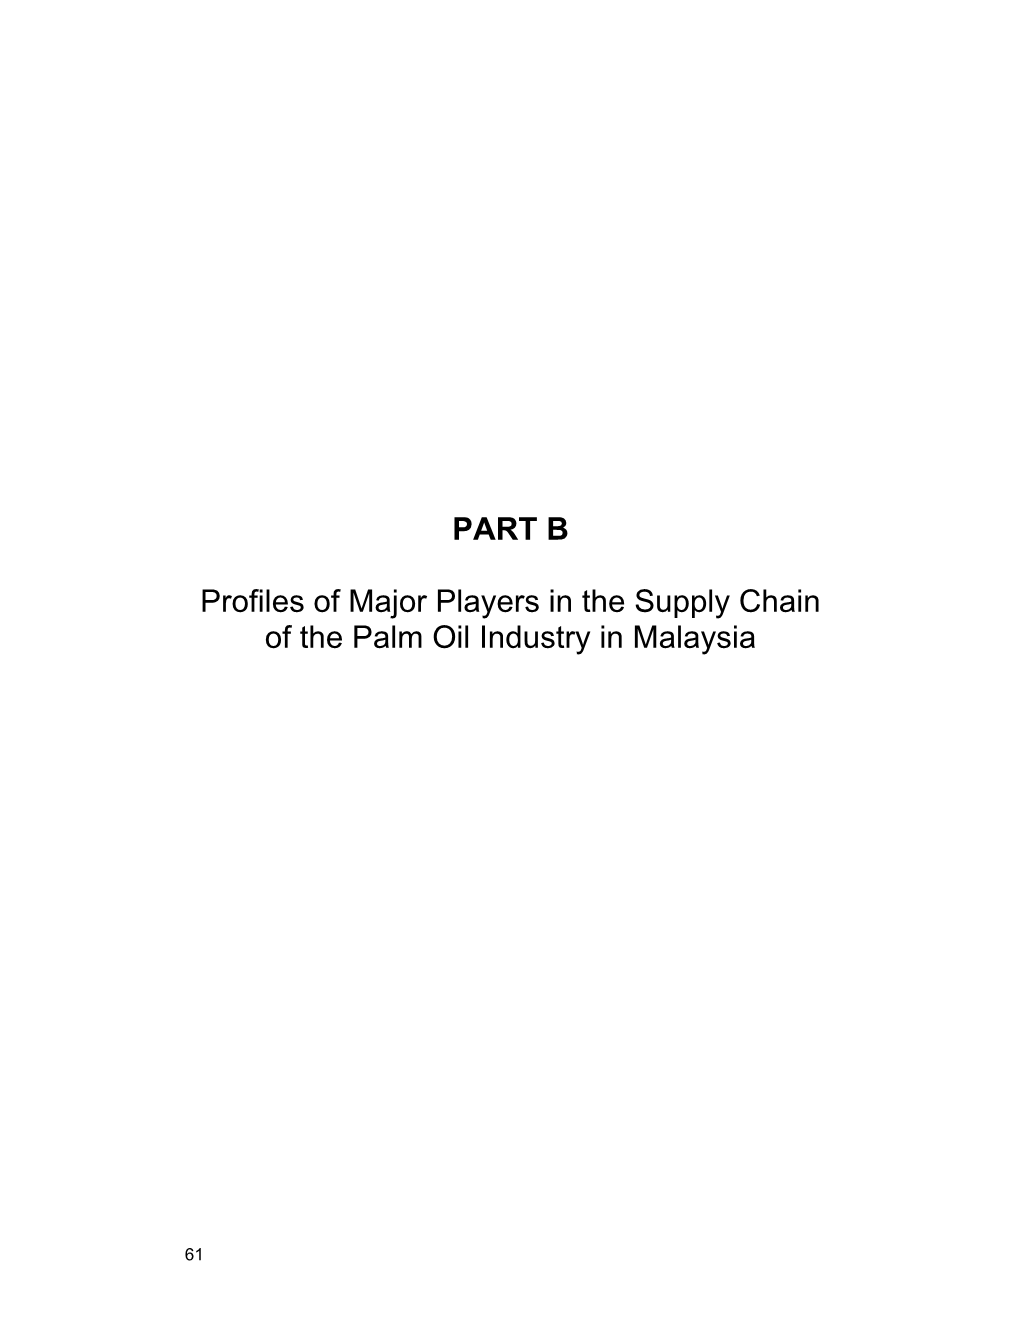 PART B Profiles of Major Players in the Supply Chain of the Palm Oil